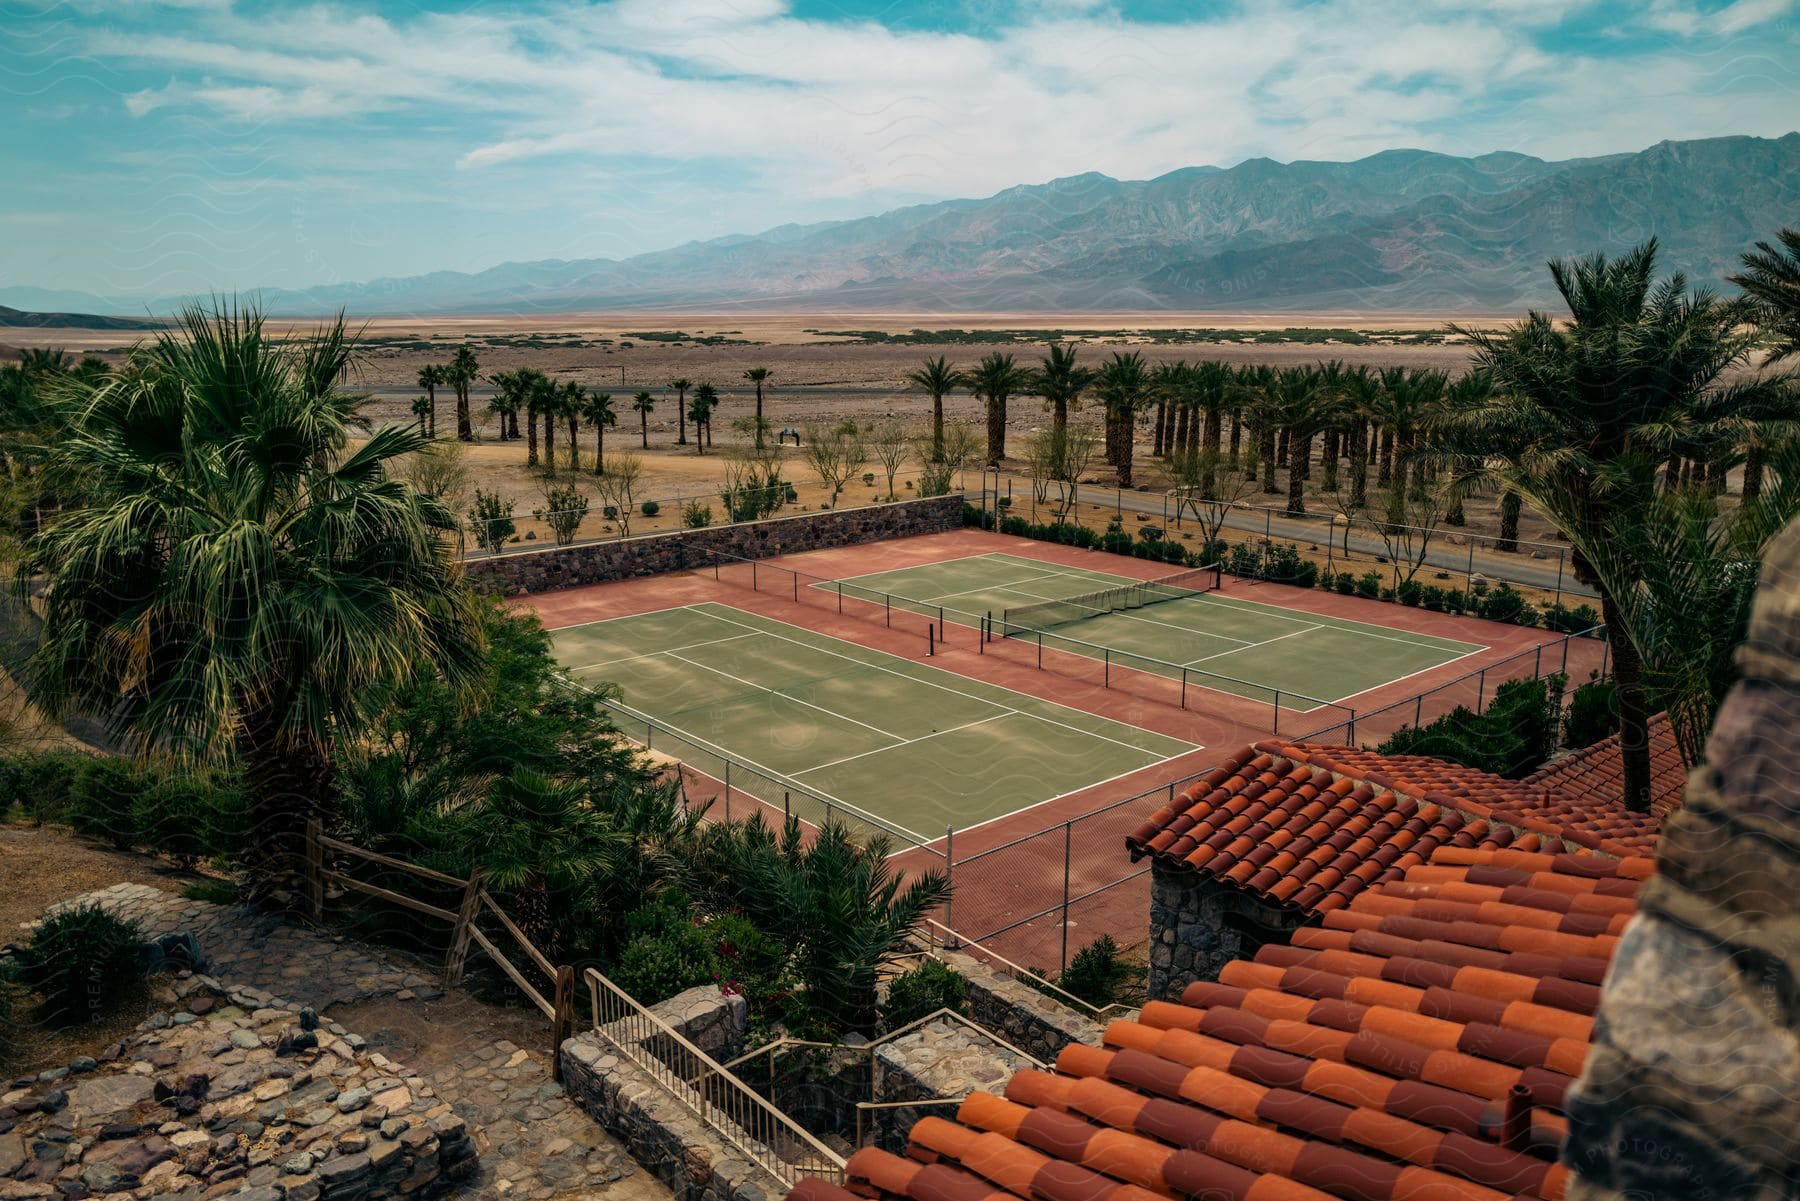 A tennis court with palm trees near a mountain